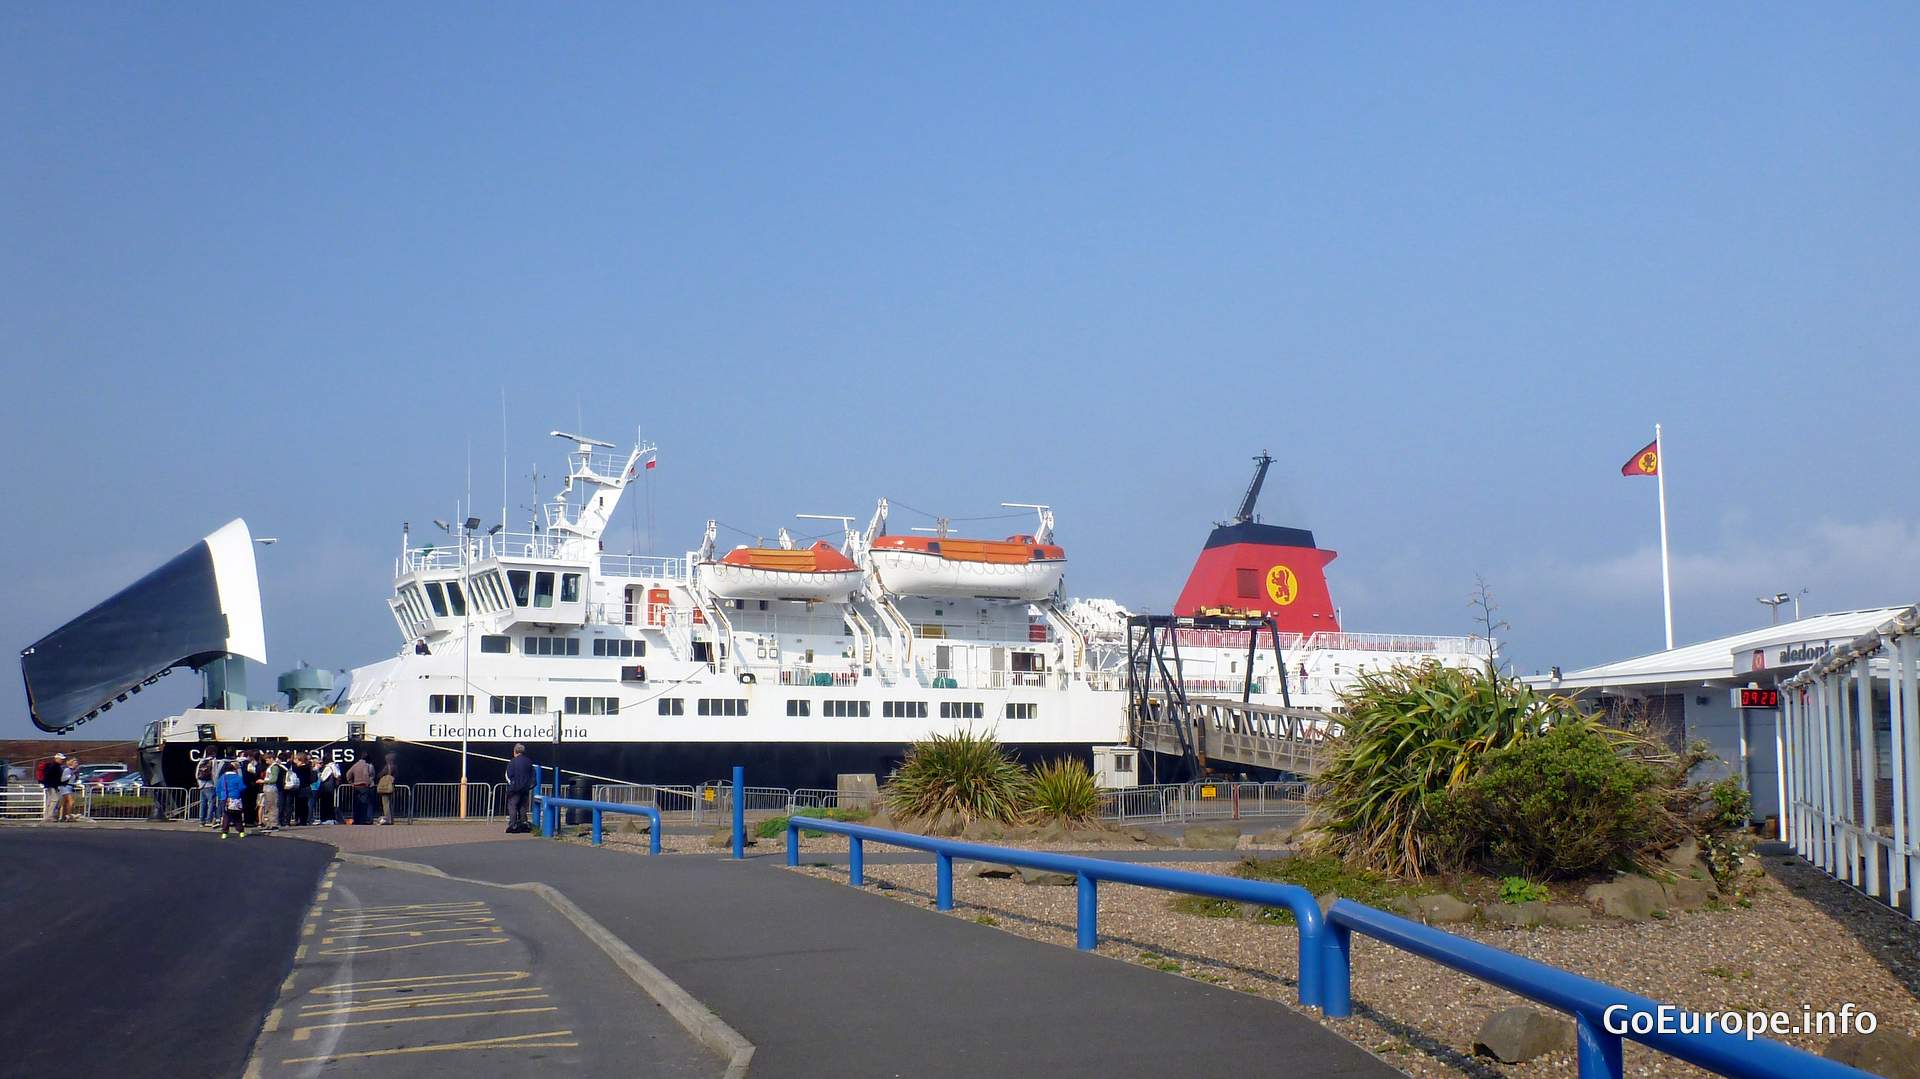 To get to the island you take this ferry, there are trains from Glasgow to the ferry. 